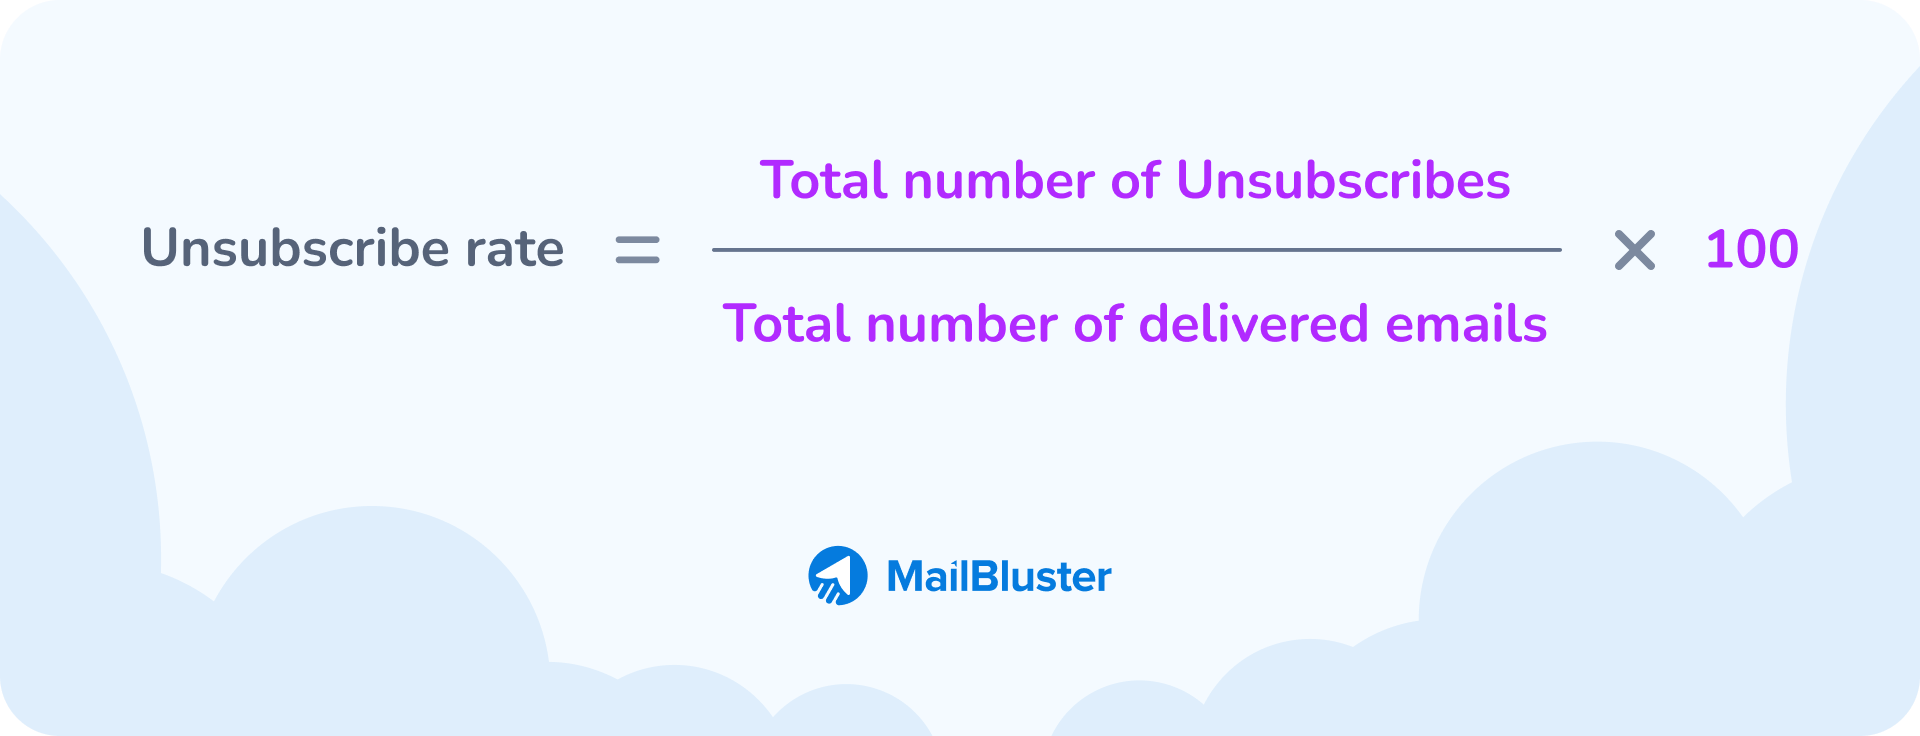 Email unsubscribe rate formula